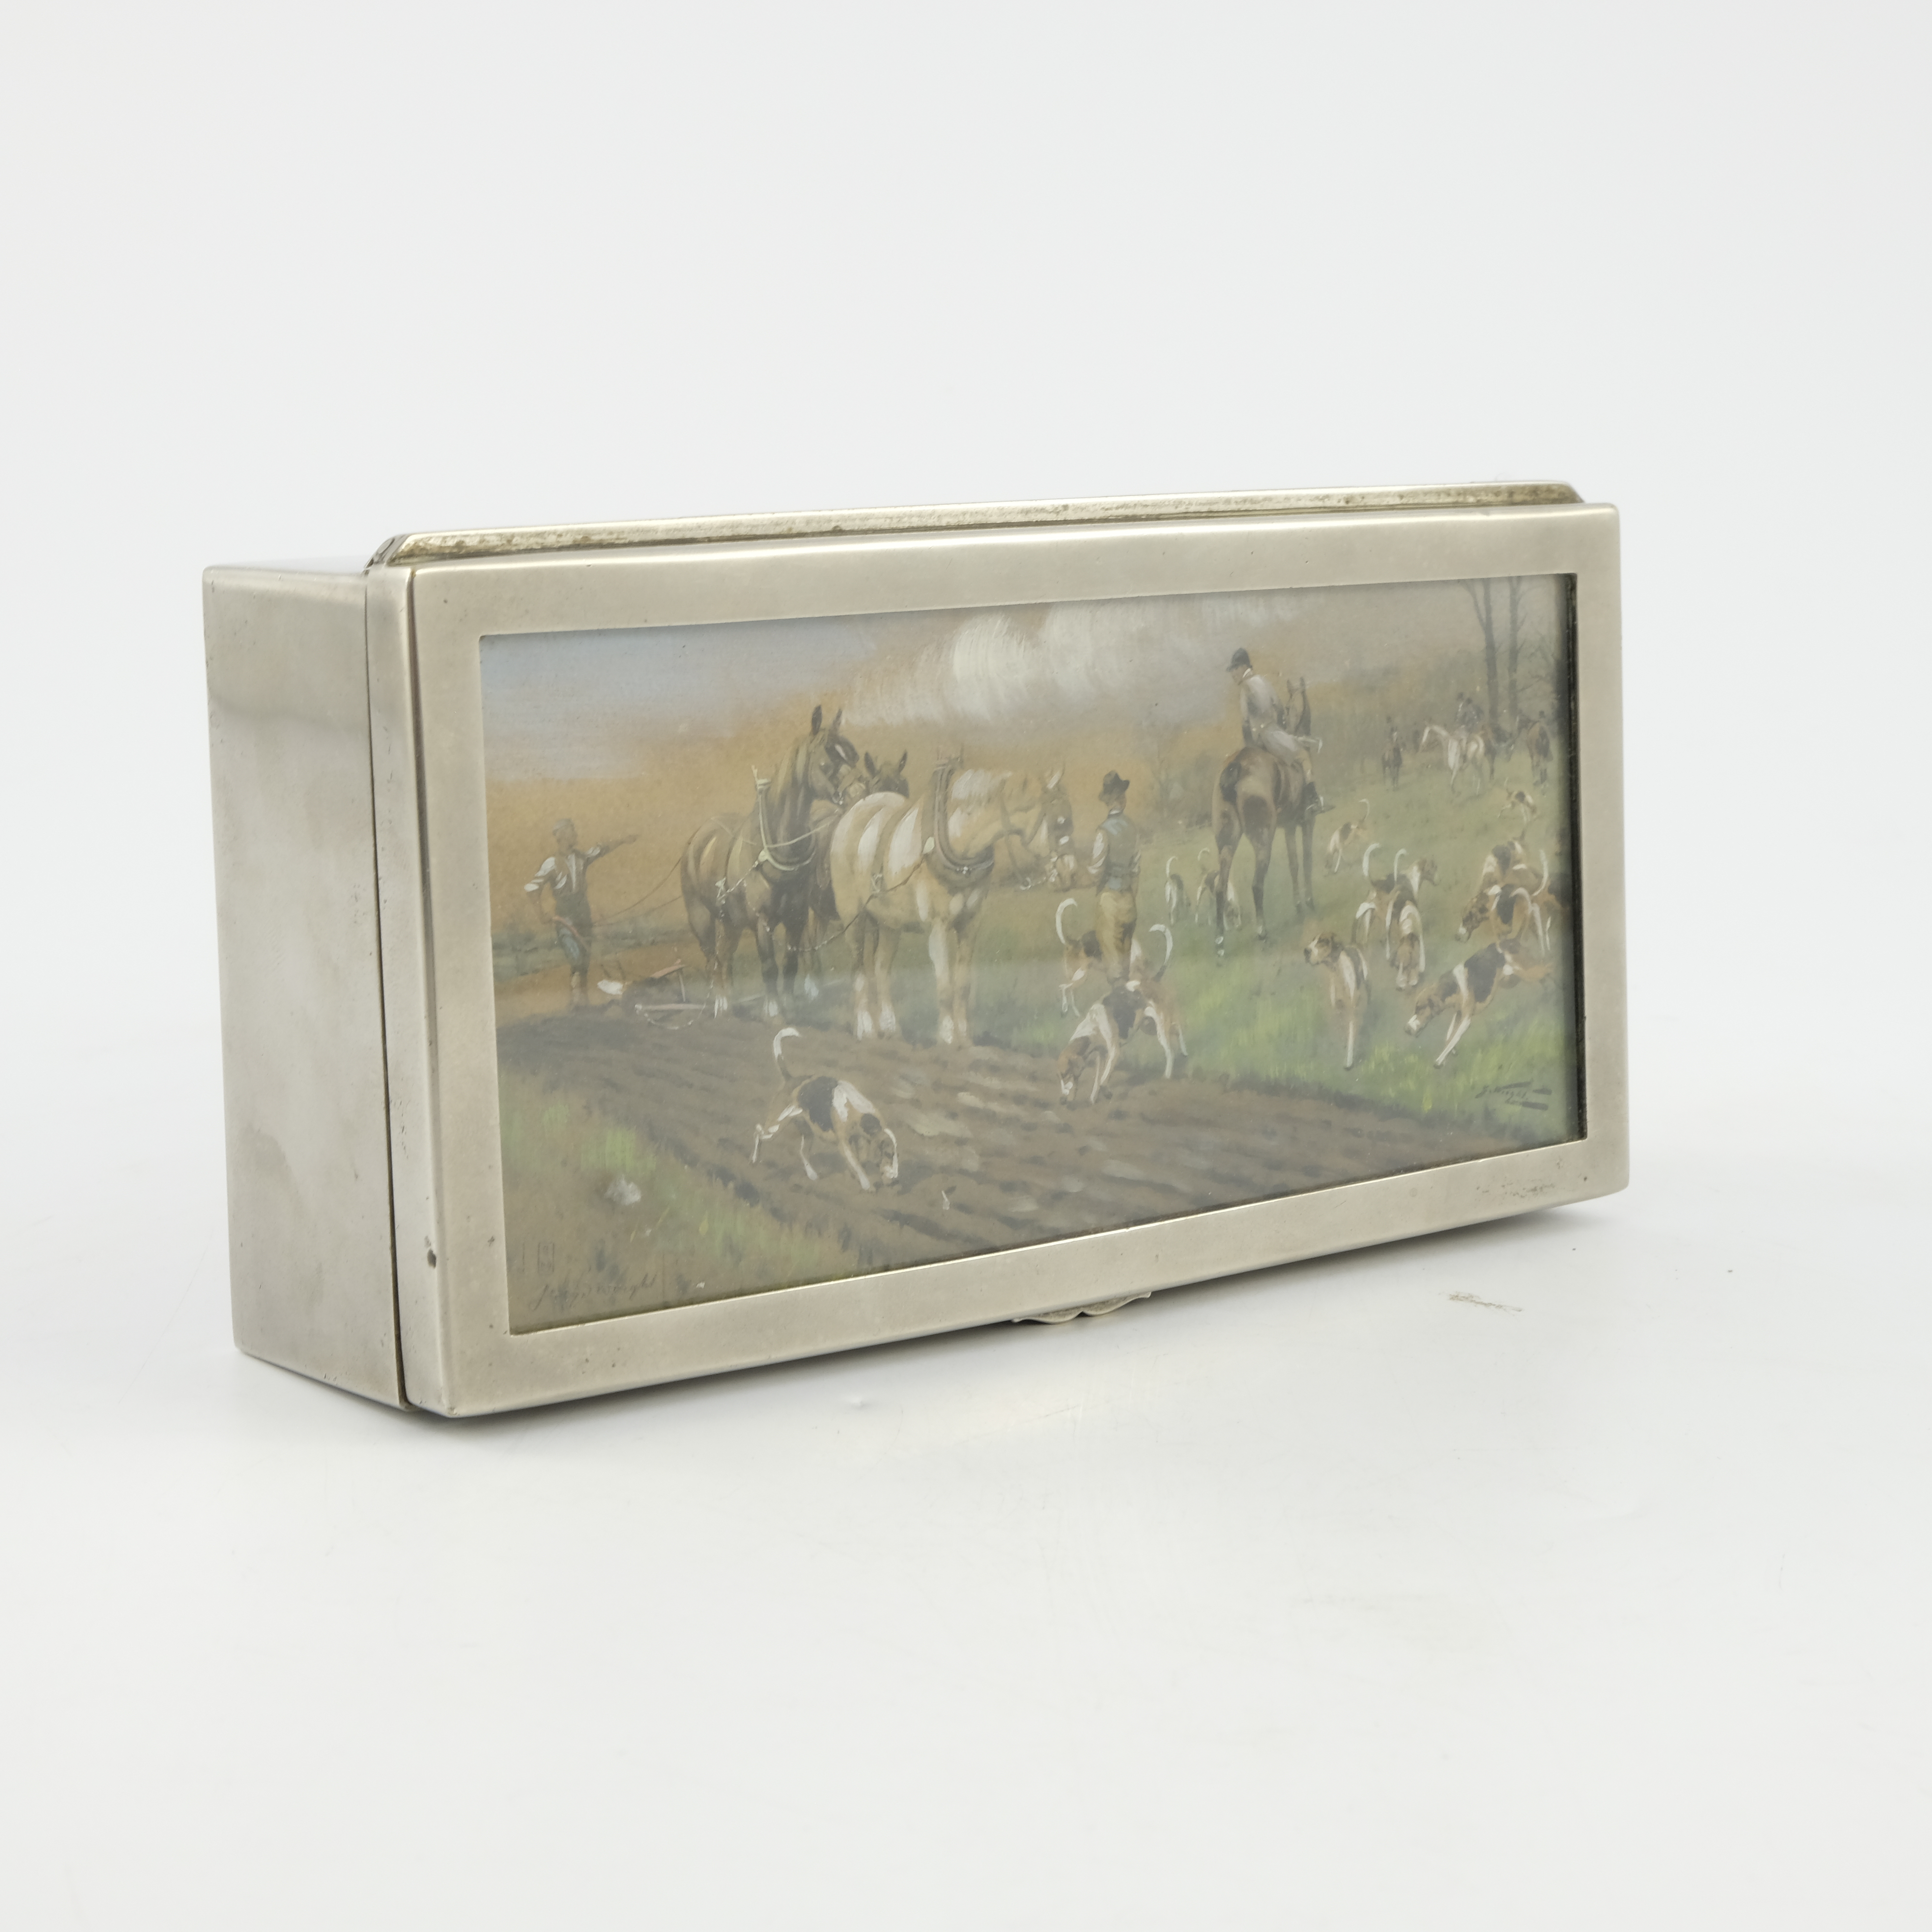 An Edwardian electroplated table cigarette casket of hunting interest, the cover with an inset - Image 3 of 4